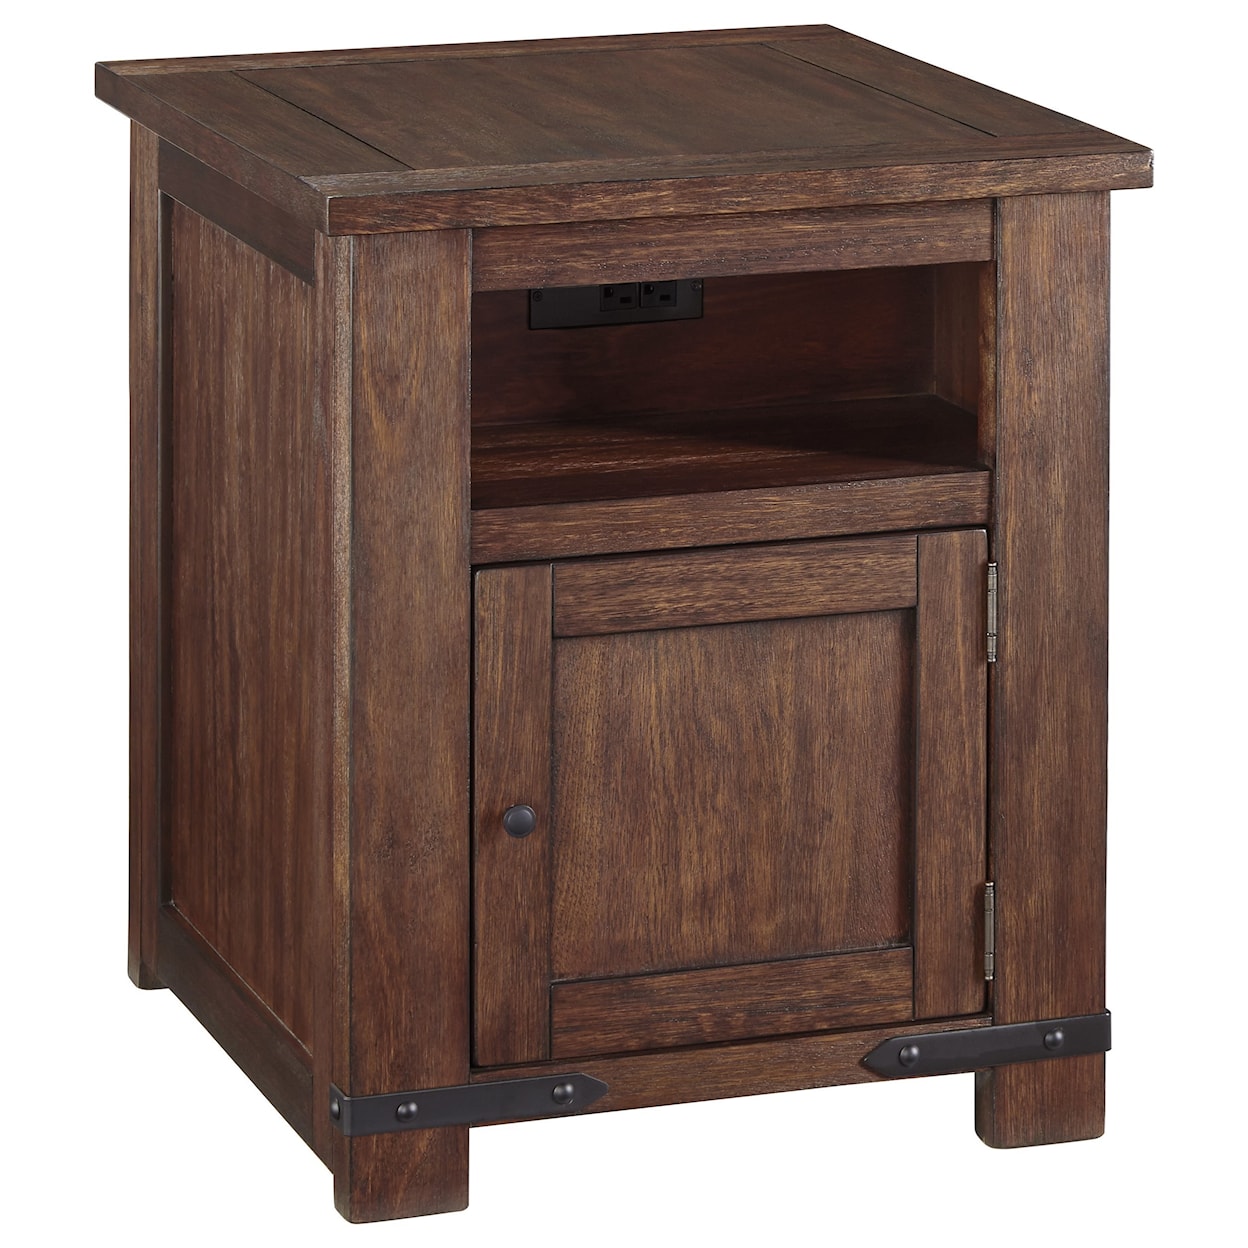 Signature Design by Ashley Furniture Budmore End Table